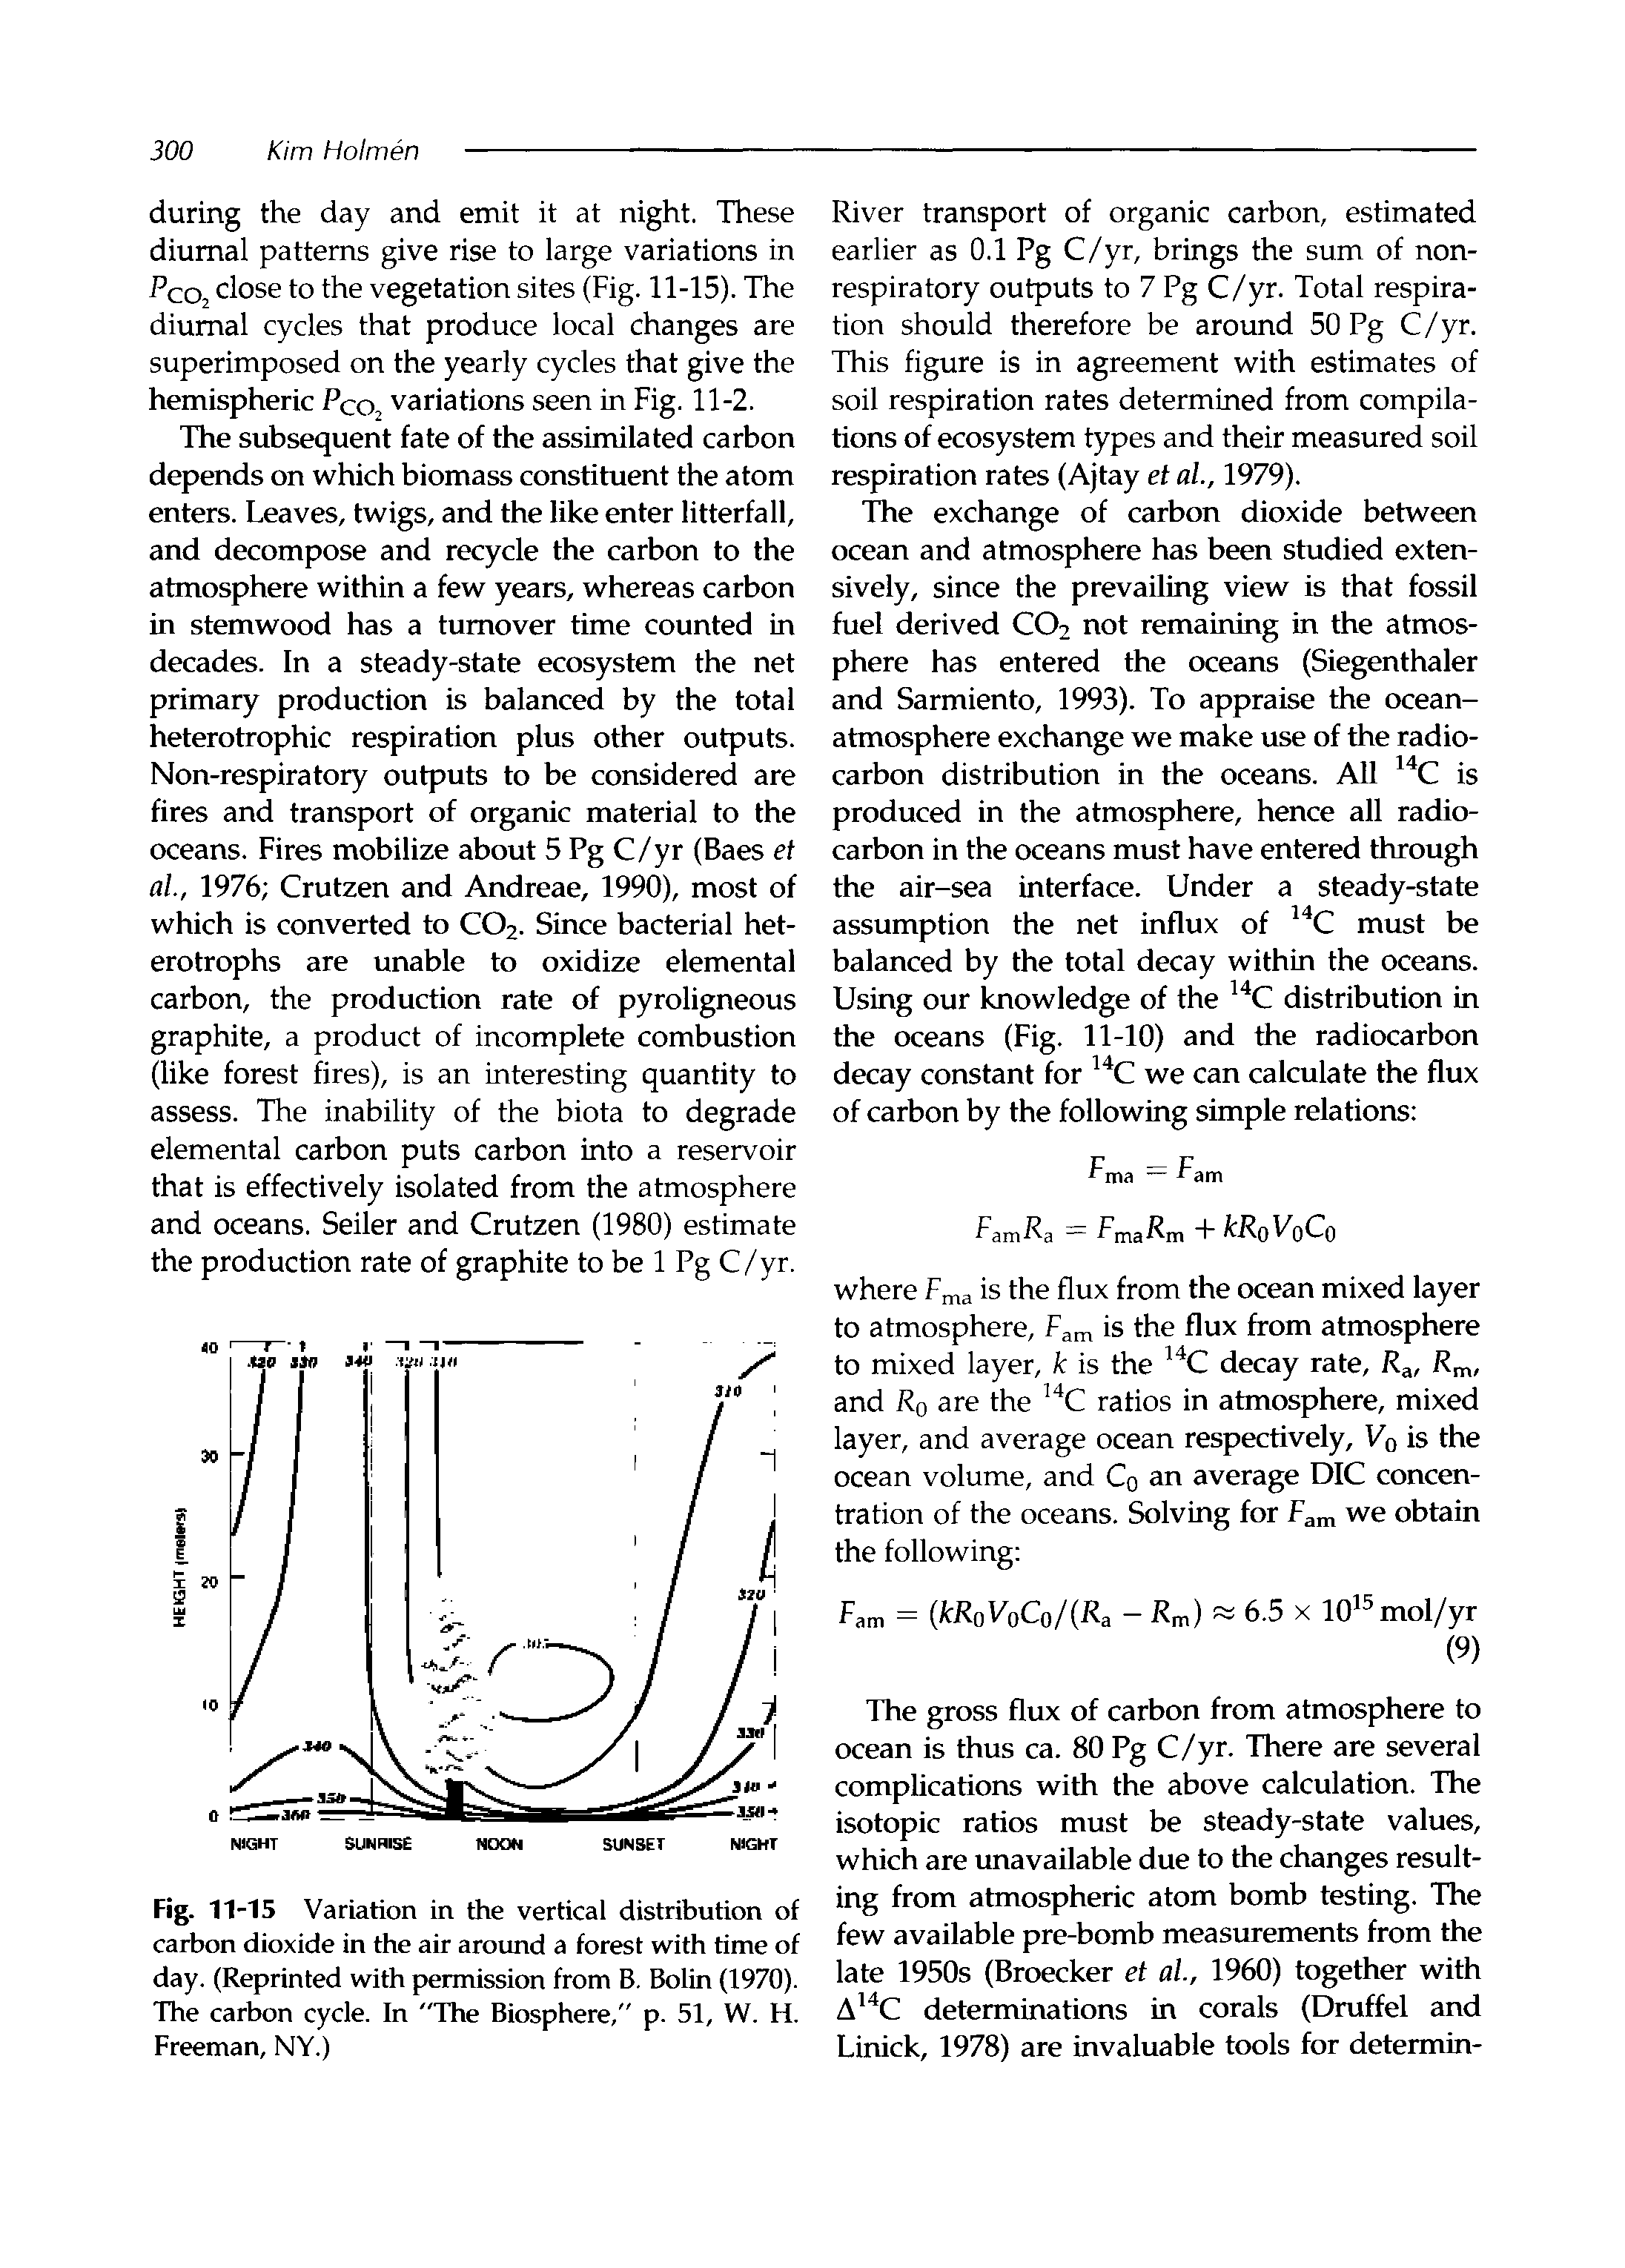 Fig. 11-15 Variation in the vertical distribution of carbon dioxide in the air around a forest with time of day. (Reprinted with permission from B, Bolin (1970). The carbon cycle. In The Biosphere," p. 51, W. H. Freeman, NY.)...